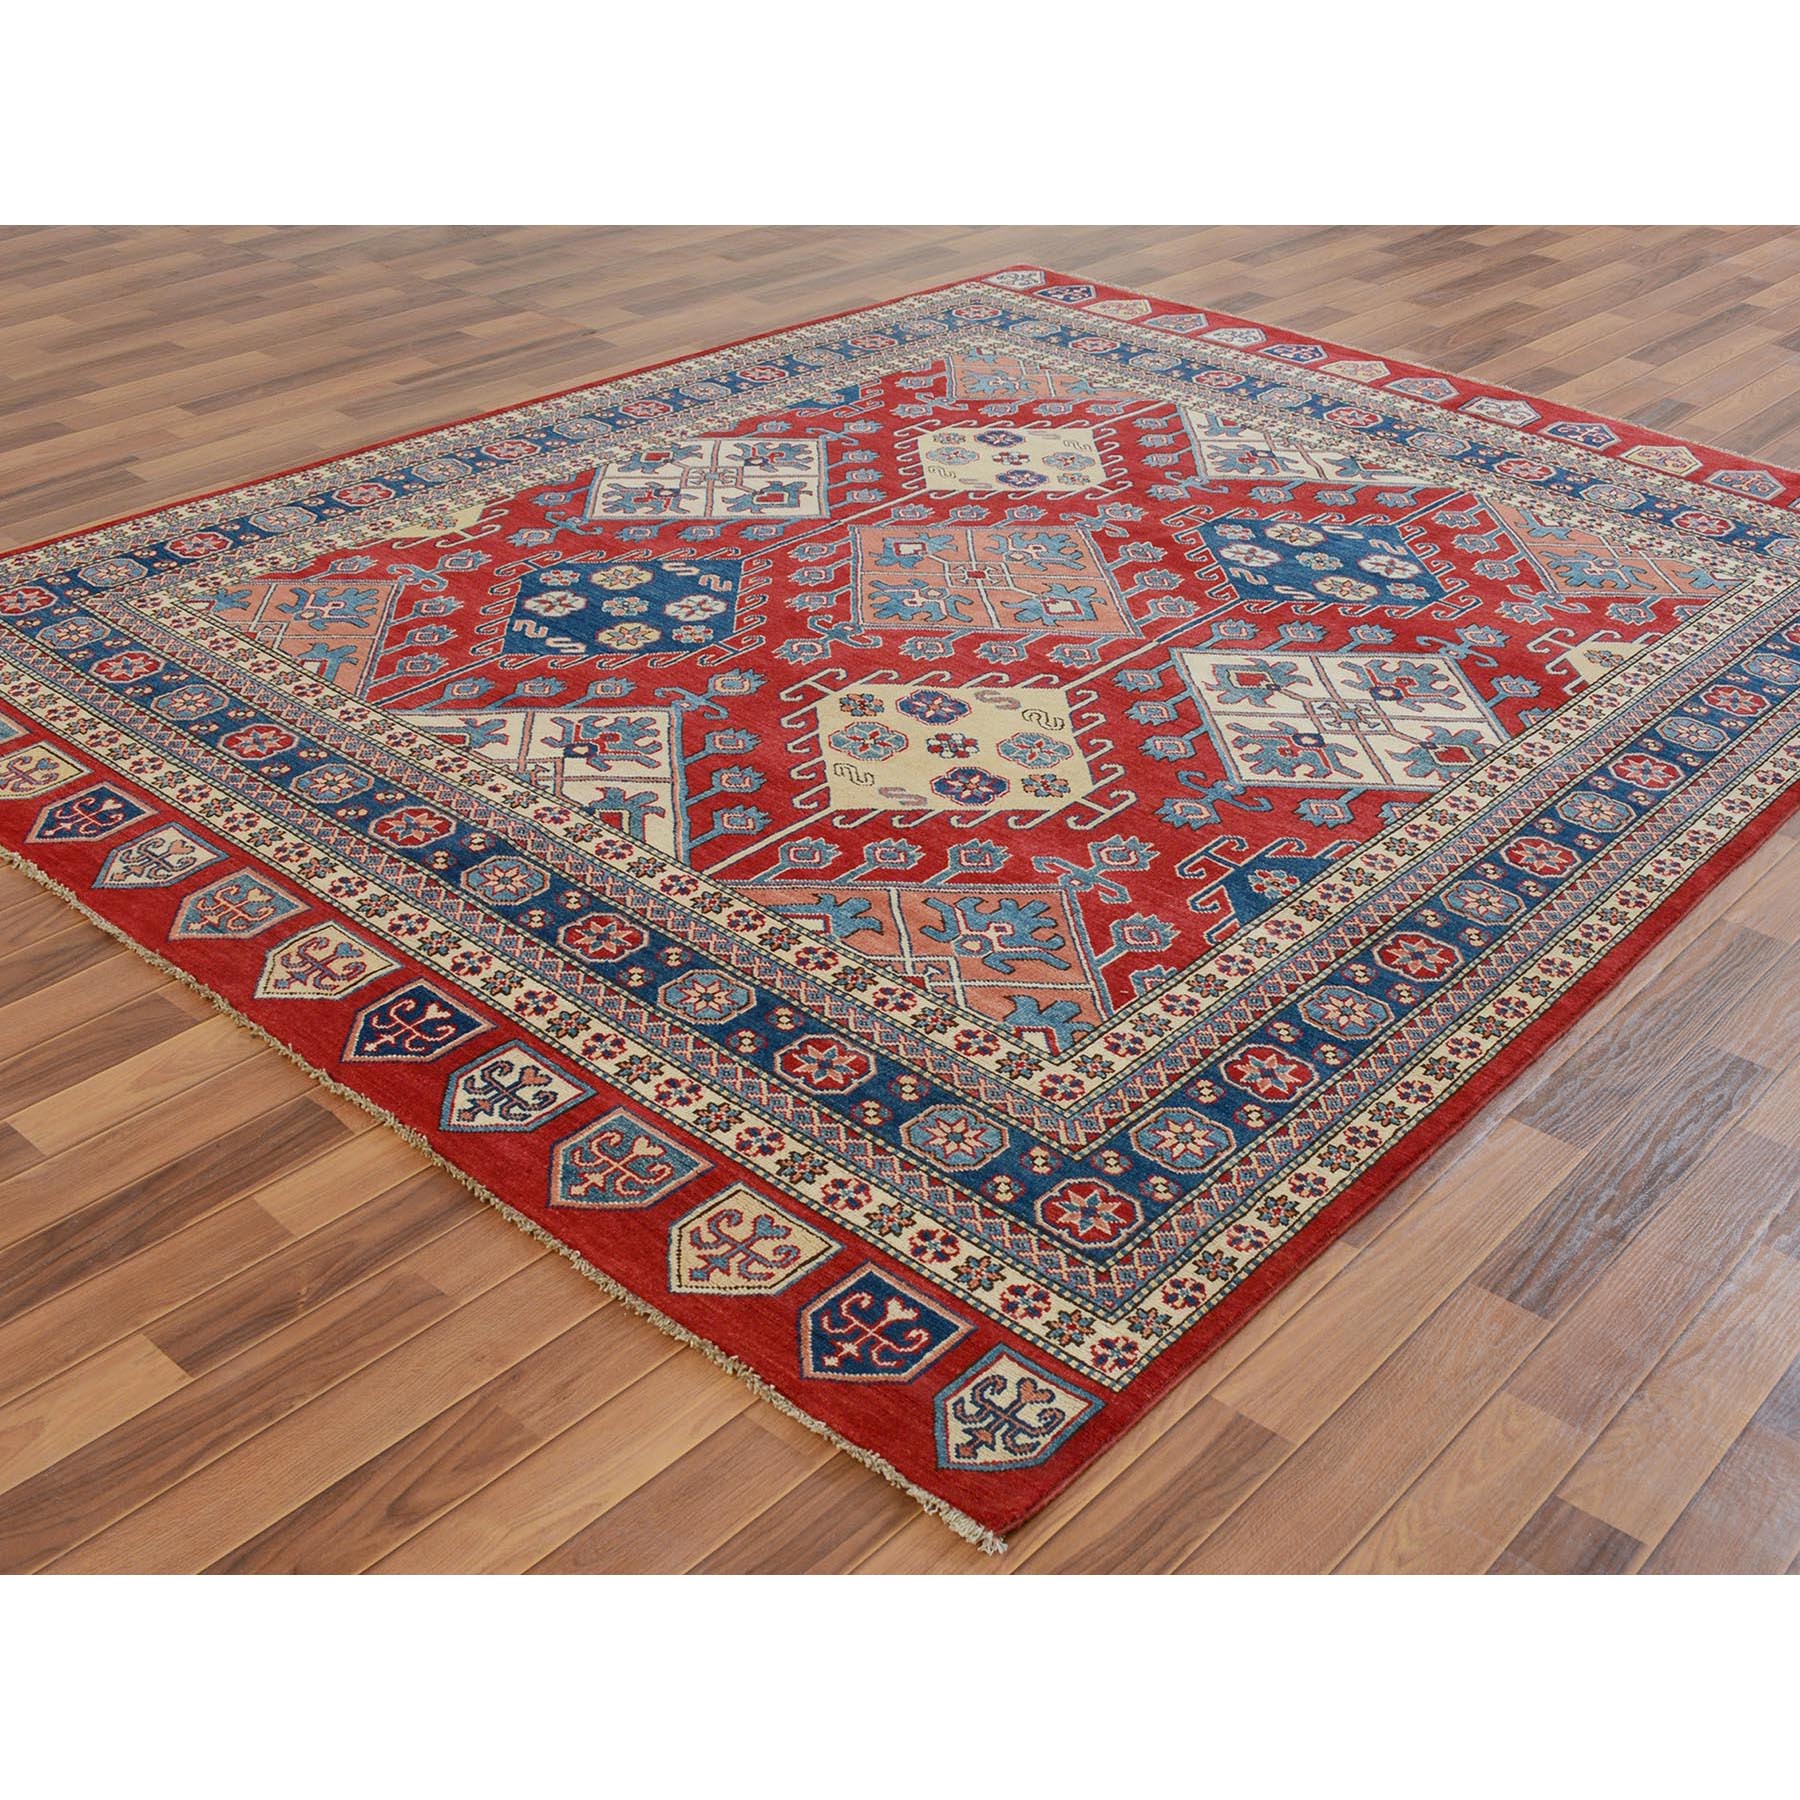 8-x9-8  Red Special kazak All OverDesign Pure wool Hand Knotted Oriental Rug 